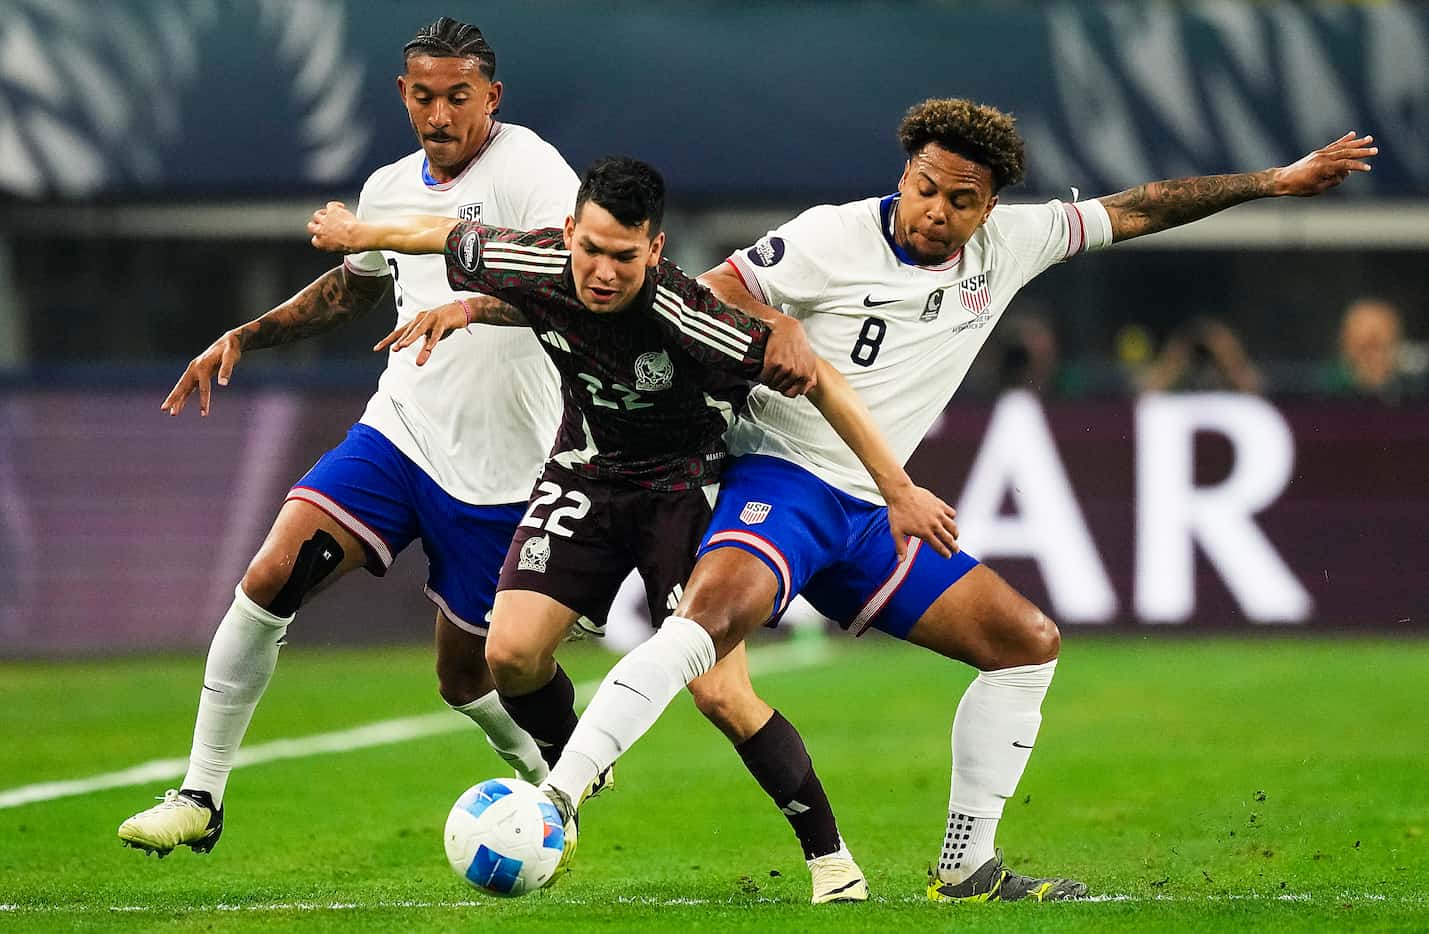 Mexico forward Hirving Lozano (22) is defended by United States midfielder Weston Mckennie...